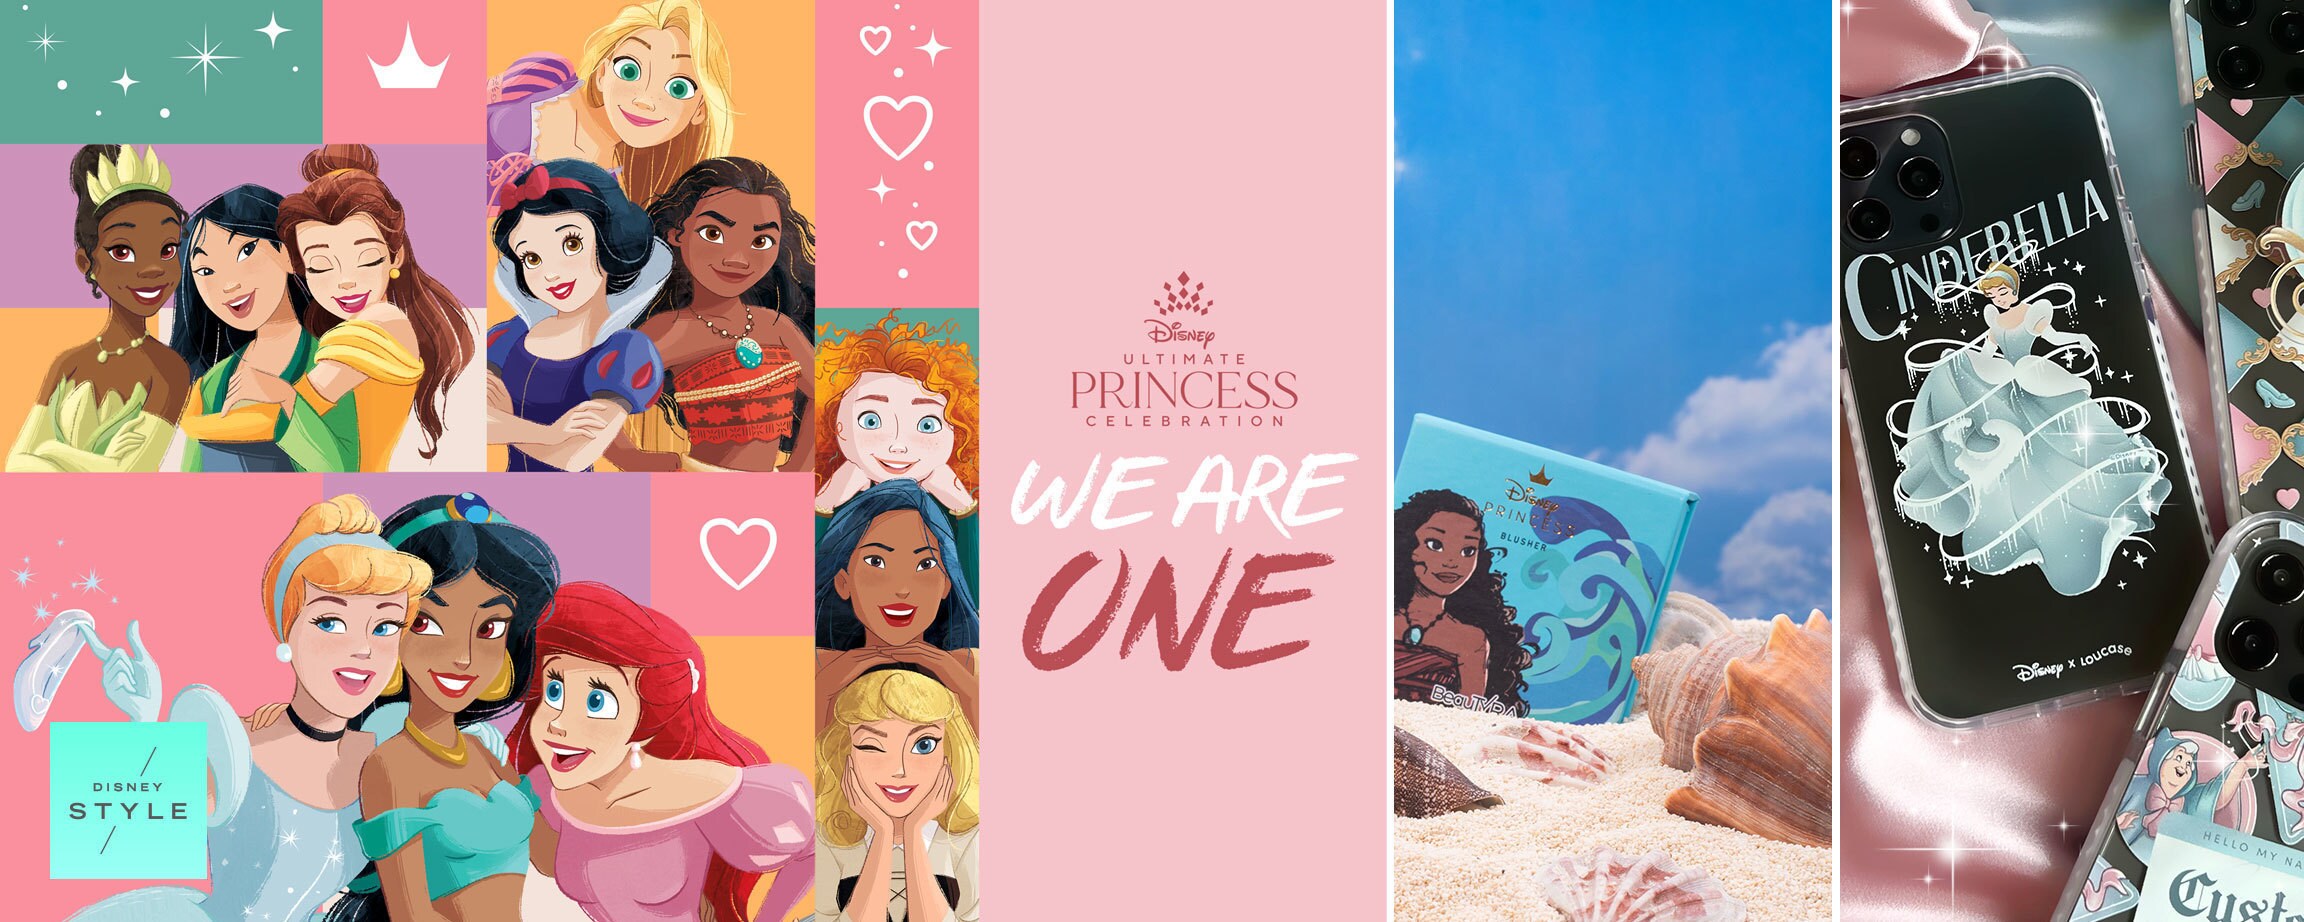 5 Things To Know About Ultimate Princess Celebration: We Are One In Malaysia!